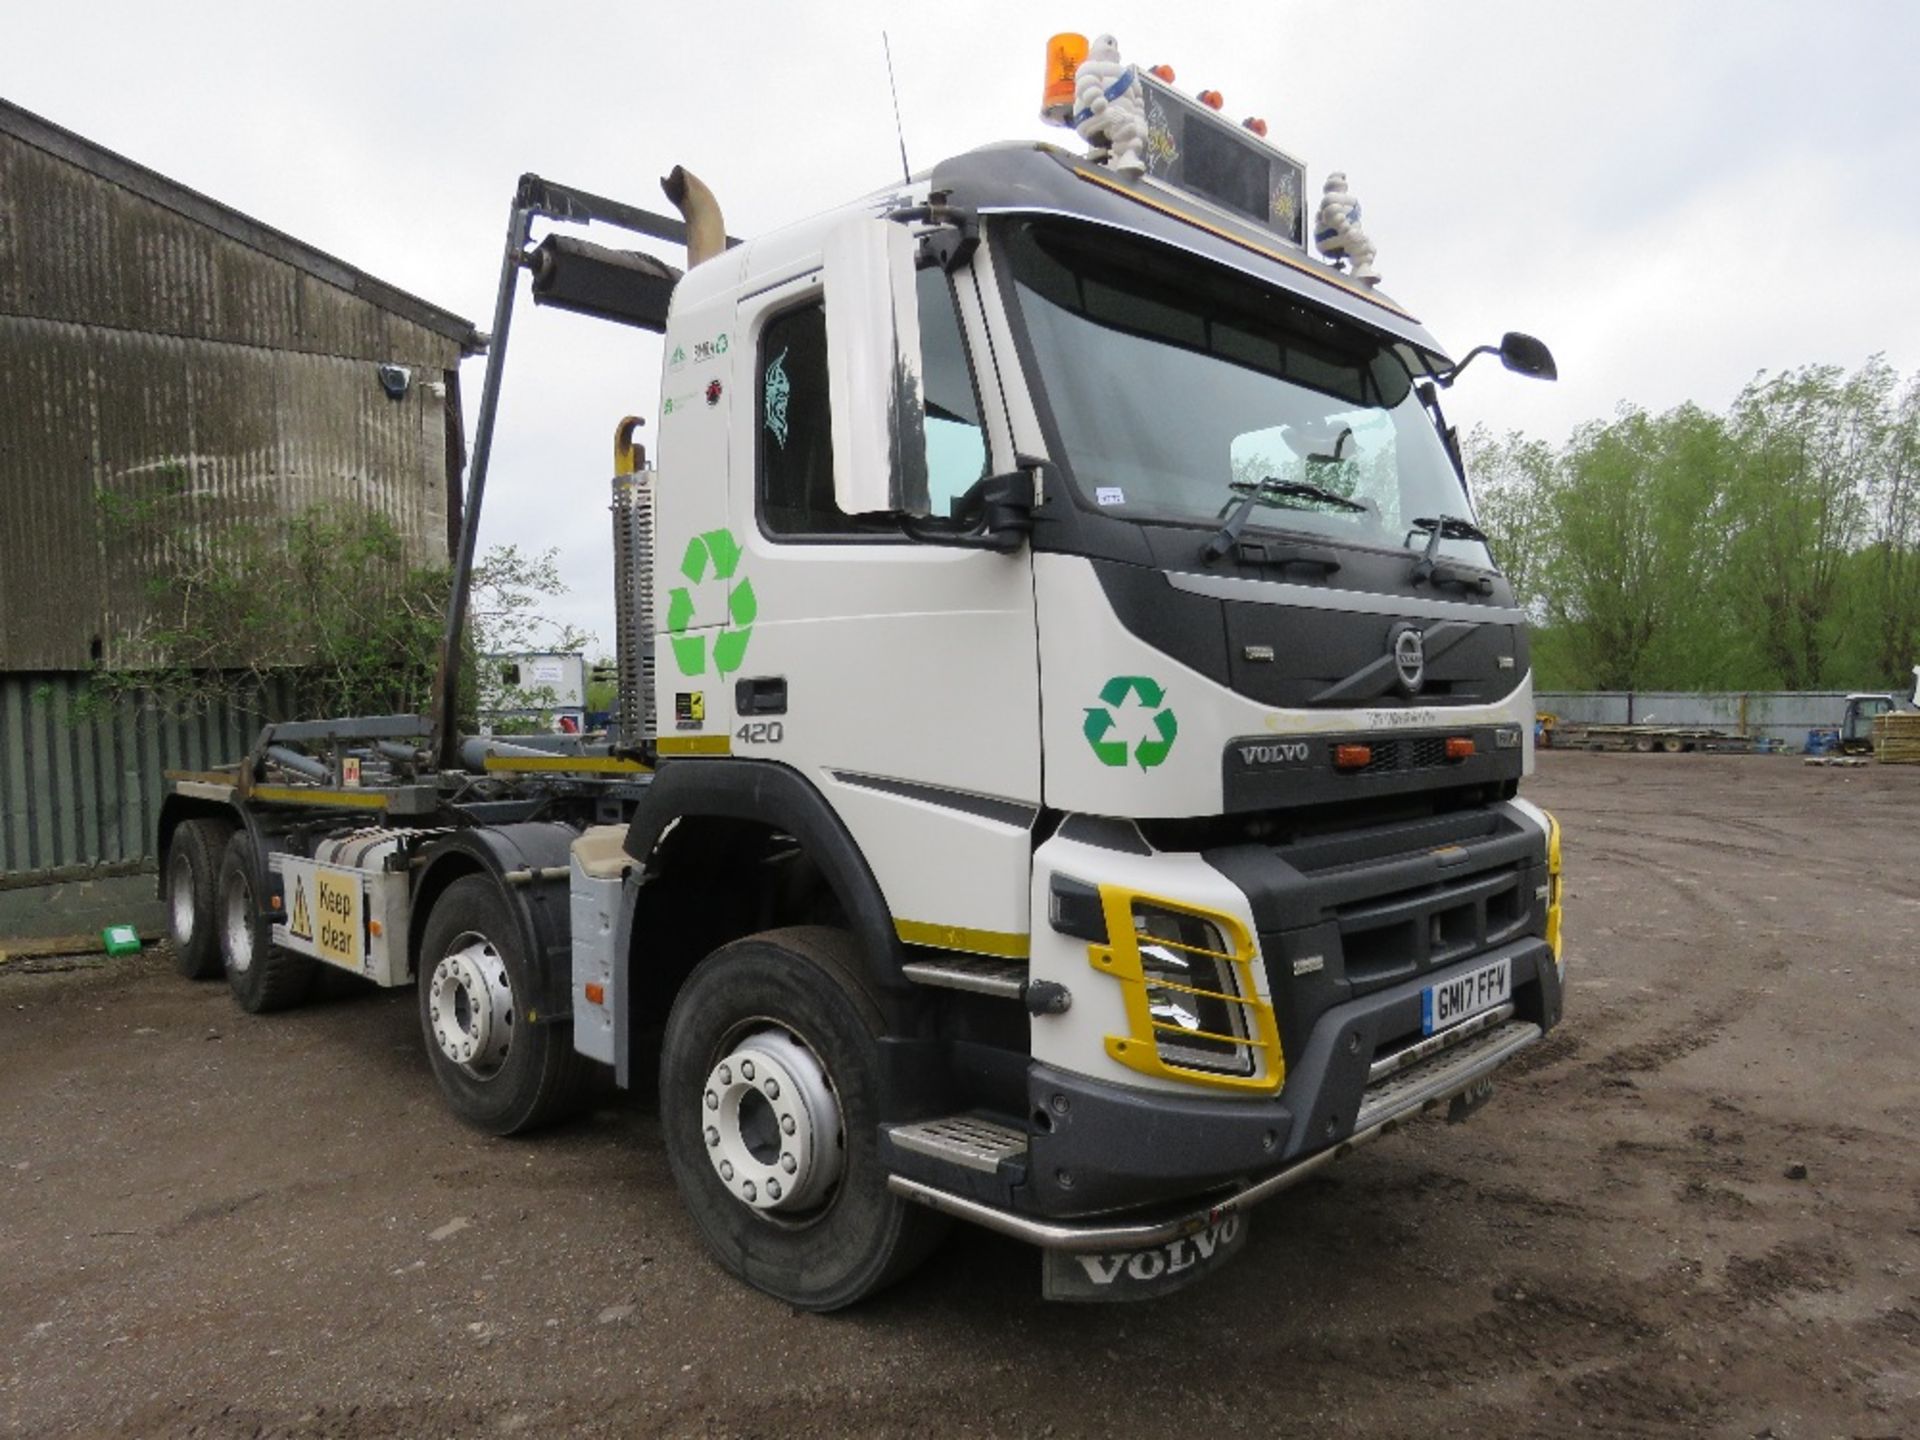 VOLVO FMX420 HOOK LOADER SKIP LORRY, 8X4 REG:GM17 FFV. WITH V5, OWNED BY VENDOR FROM NEW. DIRECT FR